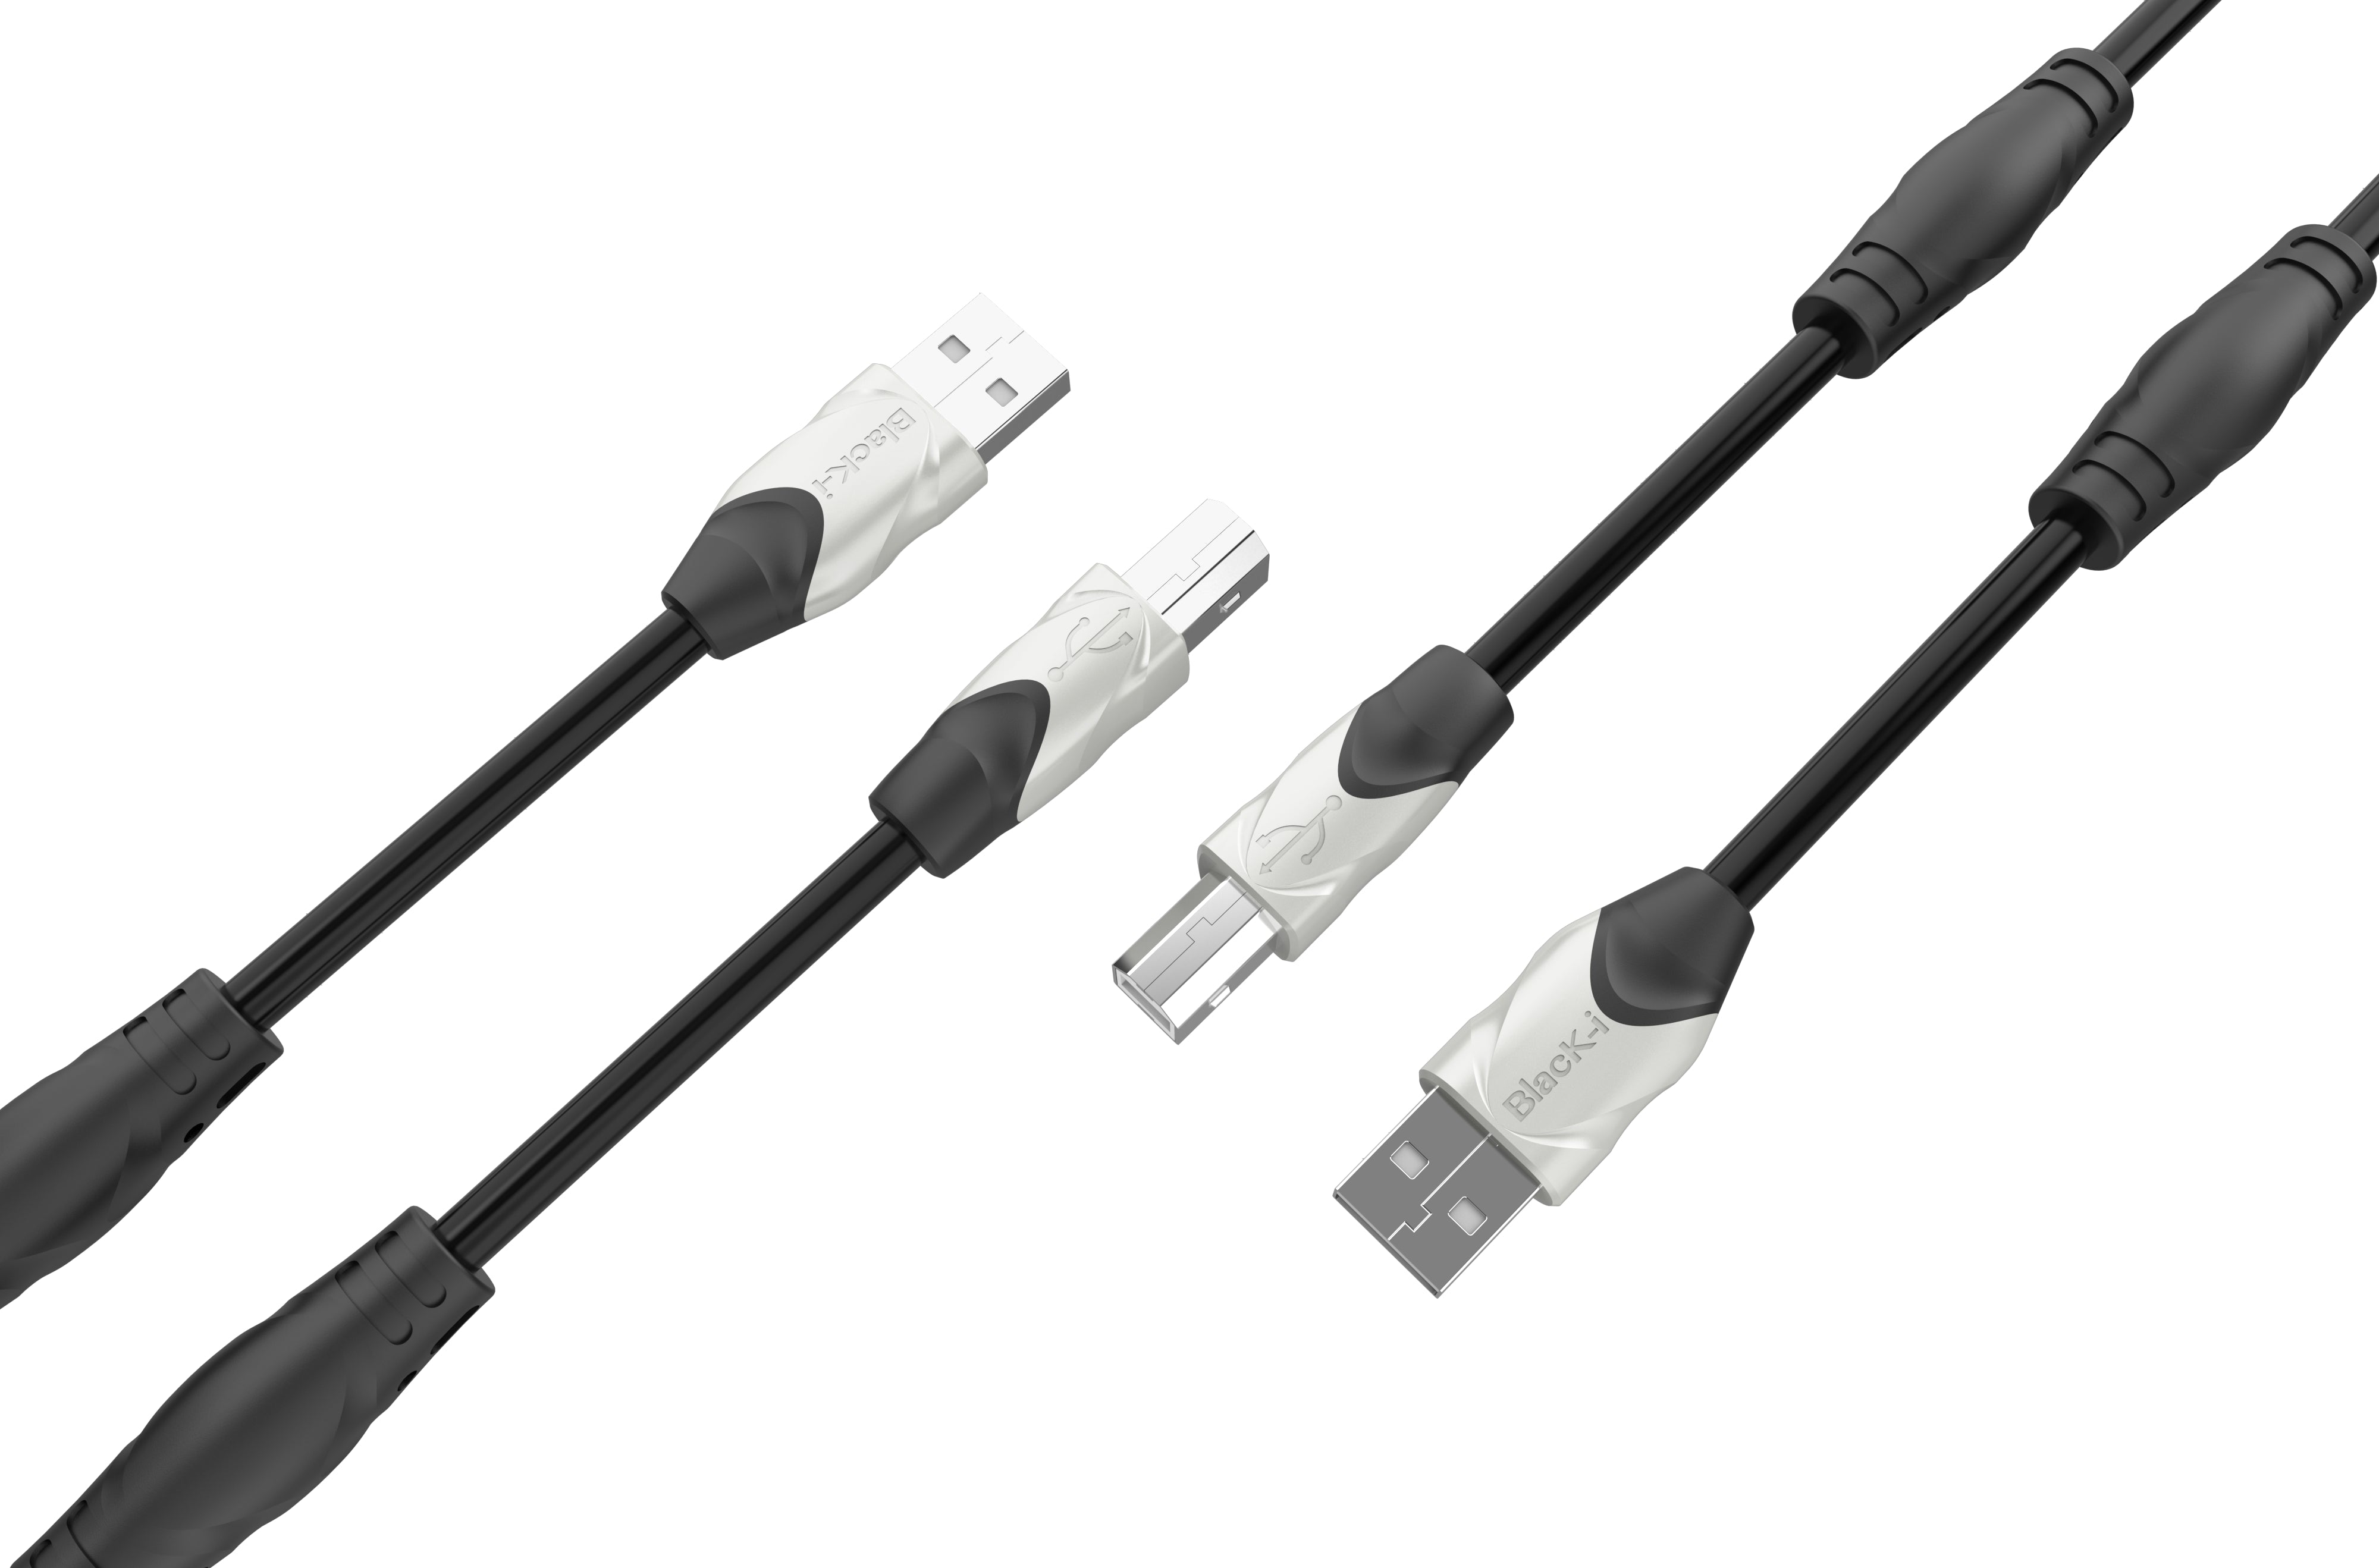 Black-i USB 2.0 Printer Cable – Reliable Connectivity for Efficient Printing and Data Transfer